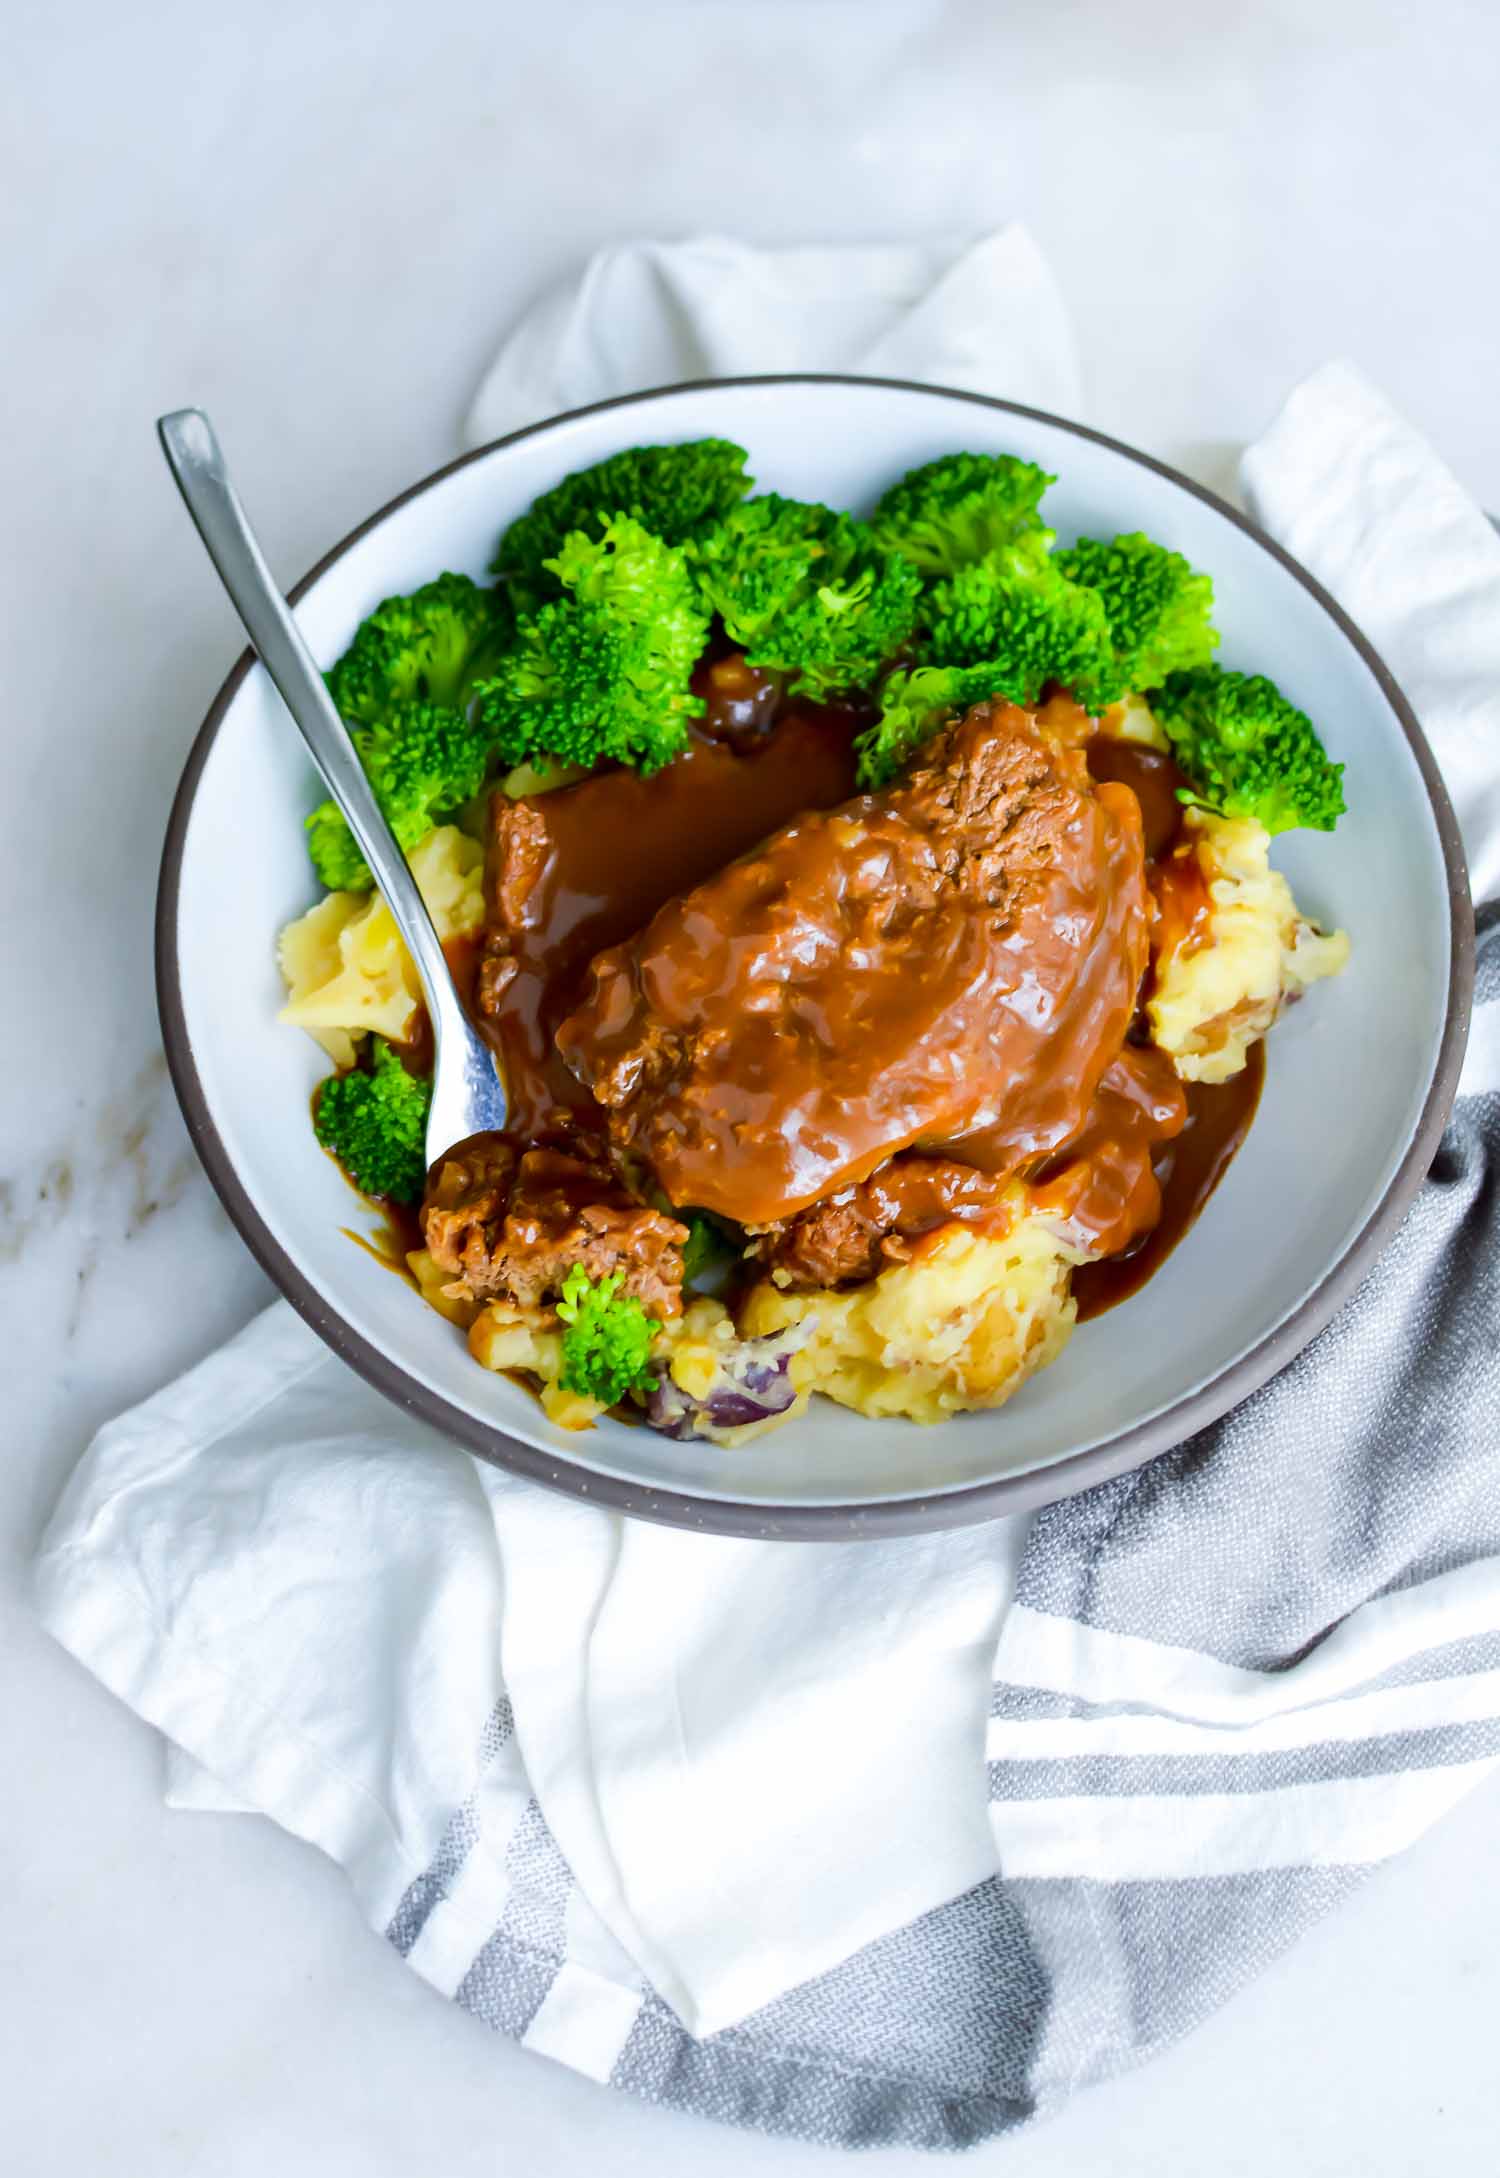 A white bowl with gray rim with cubed steaks, potato, gravy, and broccoli with a fork in it and a towel surrounding it.